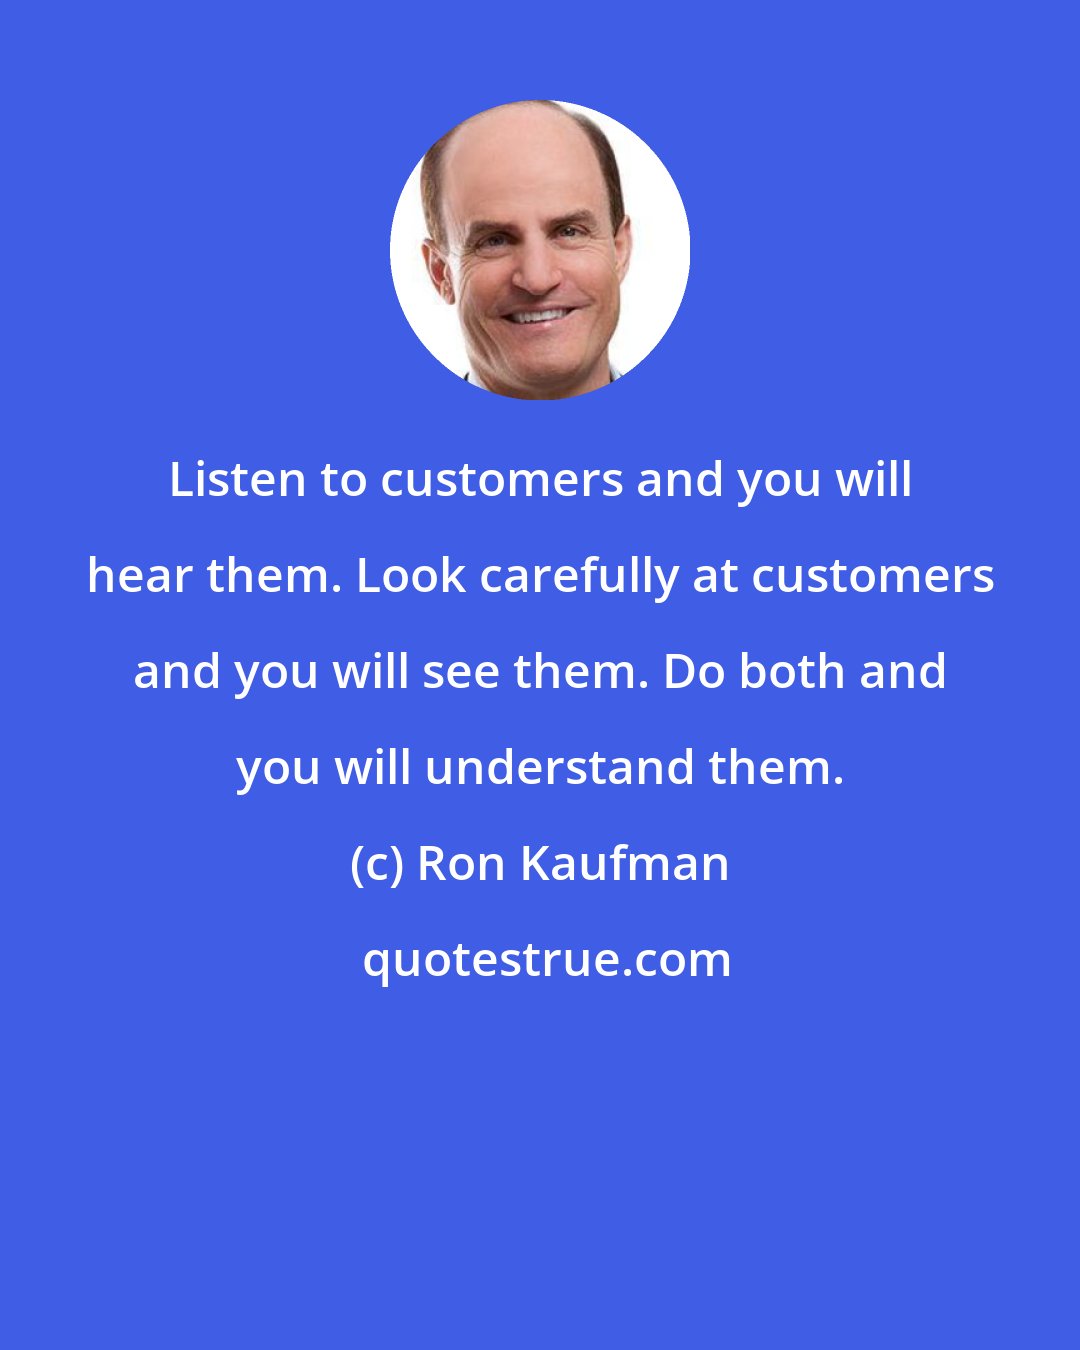 Ron Kaufman: Listen to customers and you will hear them. Look carefully at customers and you will see them. Do both and you will understand them.